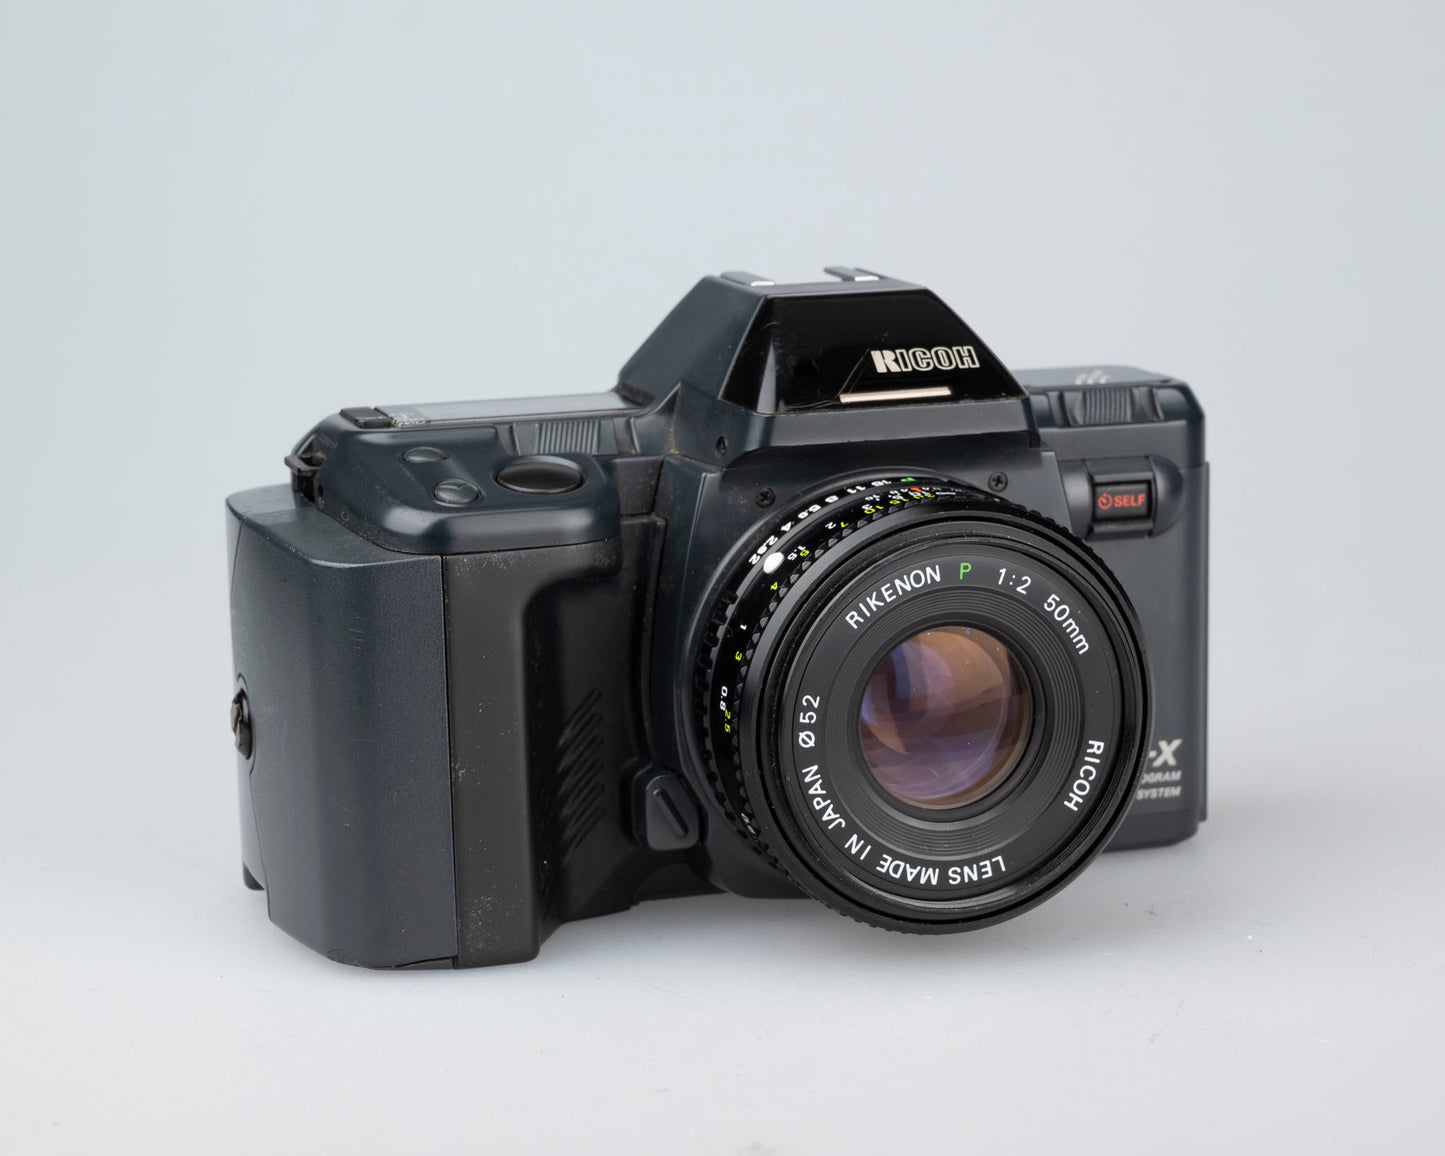 The Ricoh XR-X aka XR-M is a high-end, feature-rich 35mm SLR from 1988